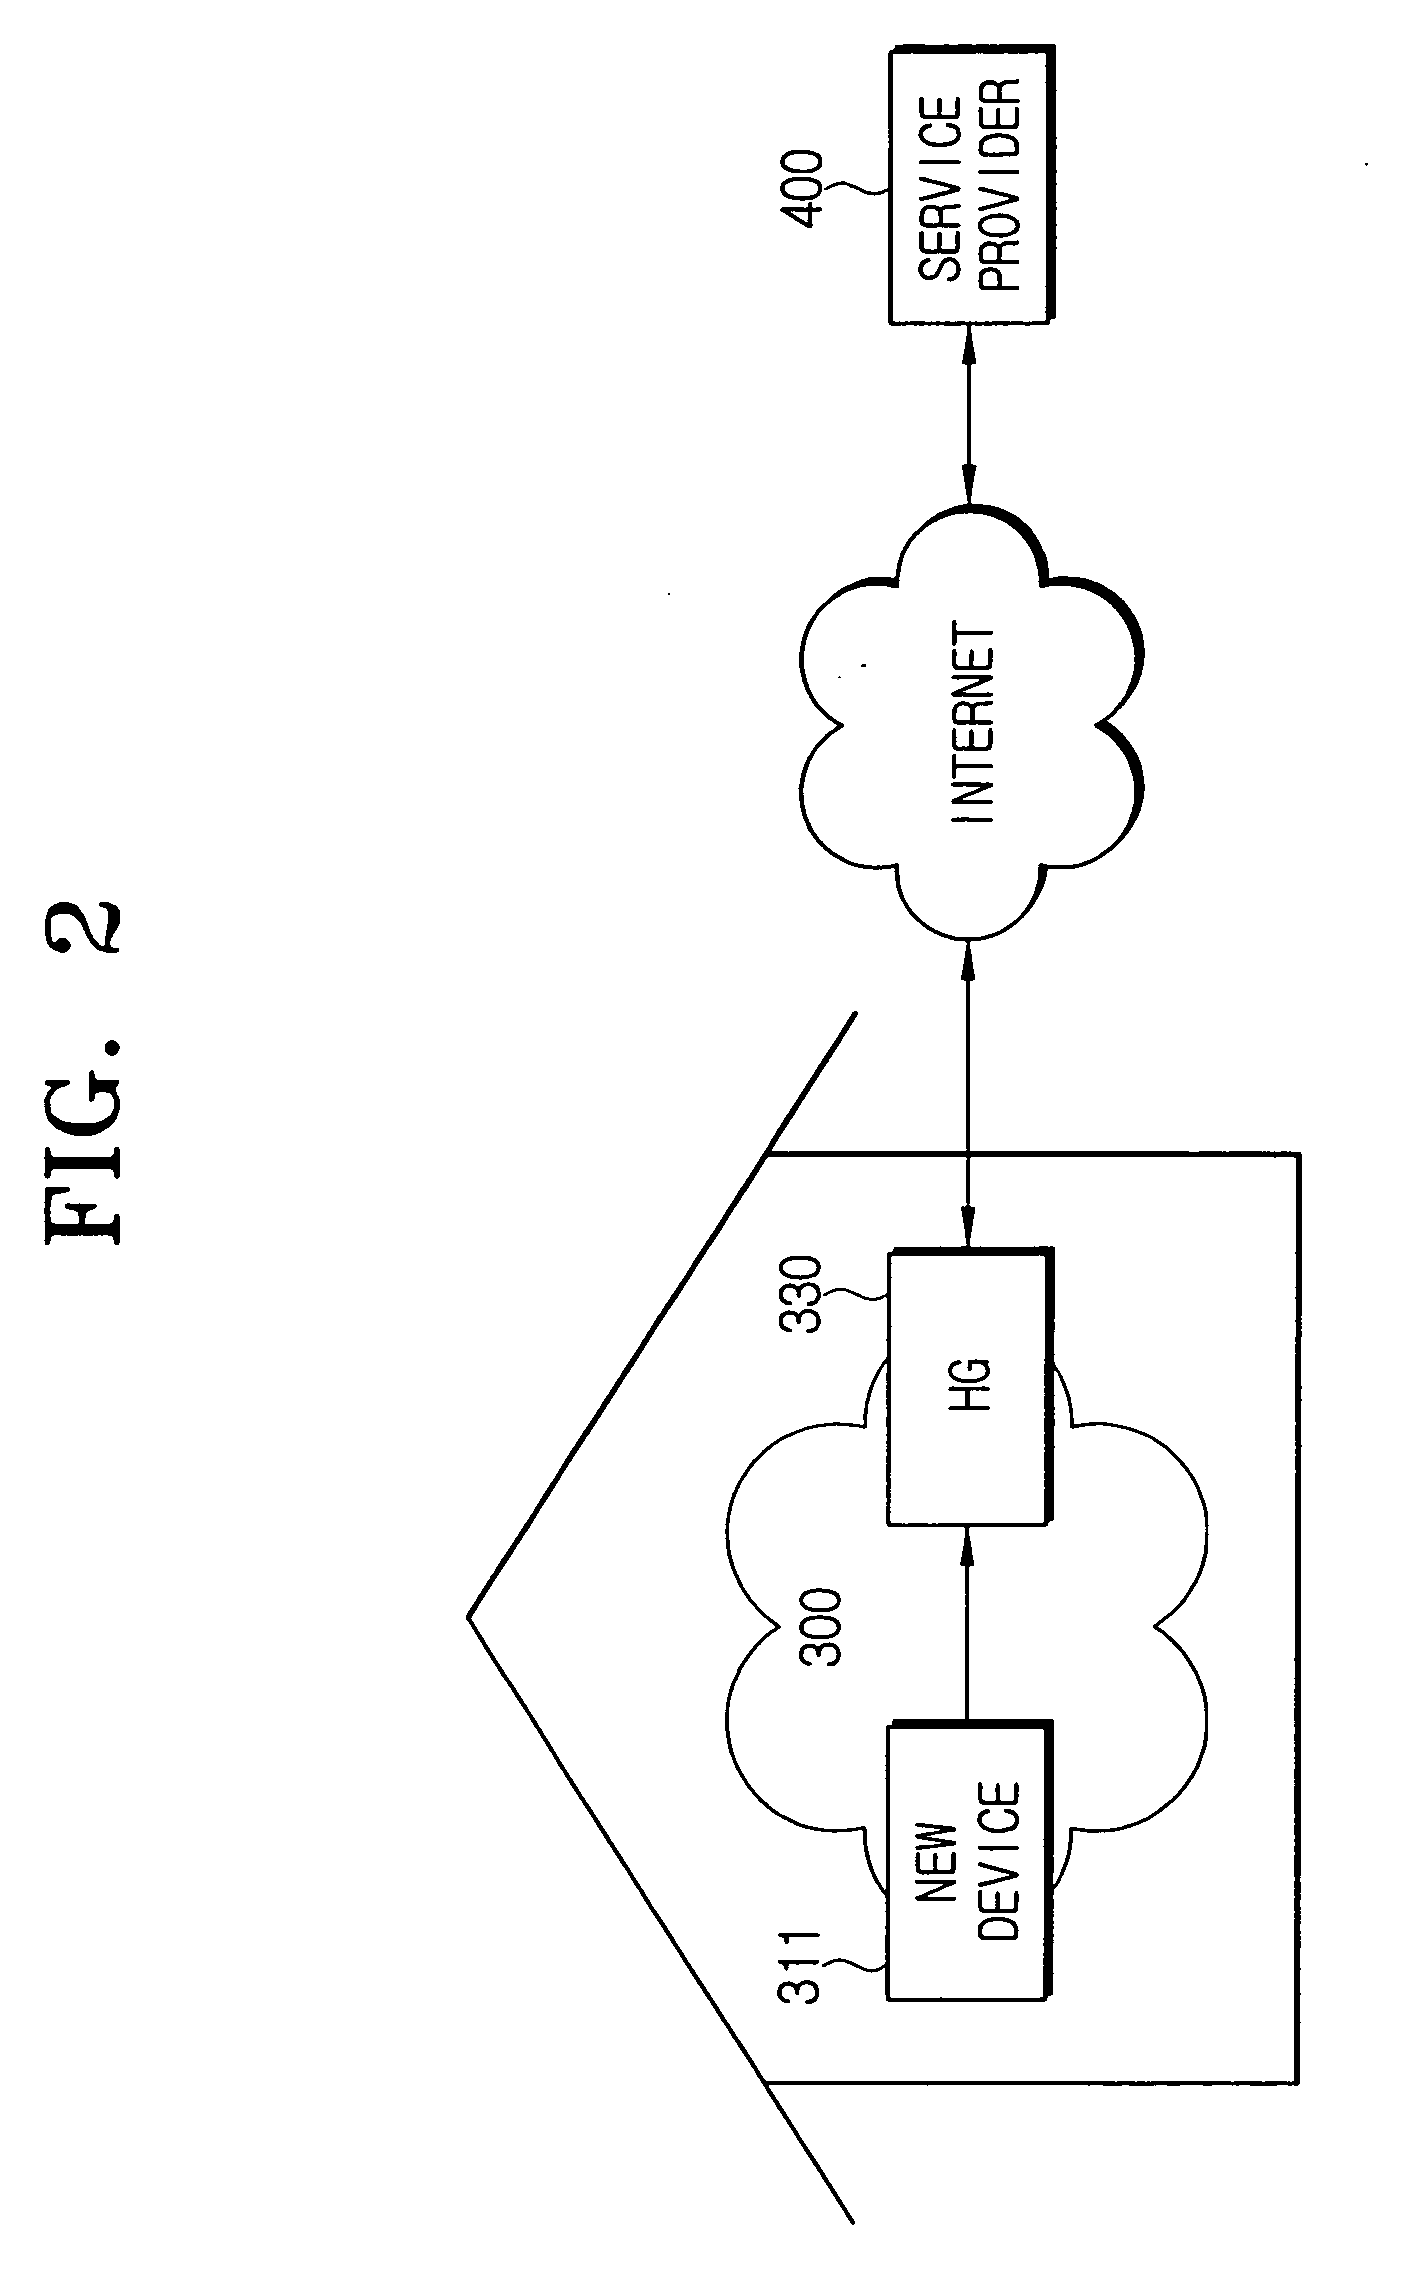 Home device authentication system and method